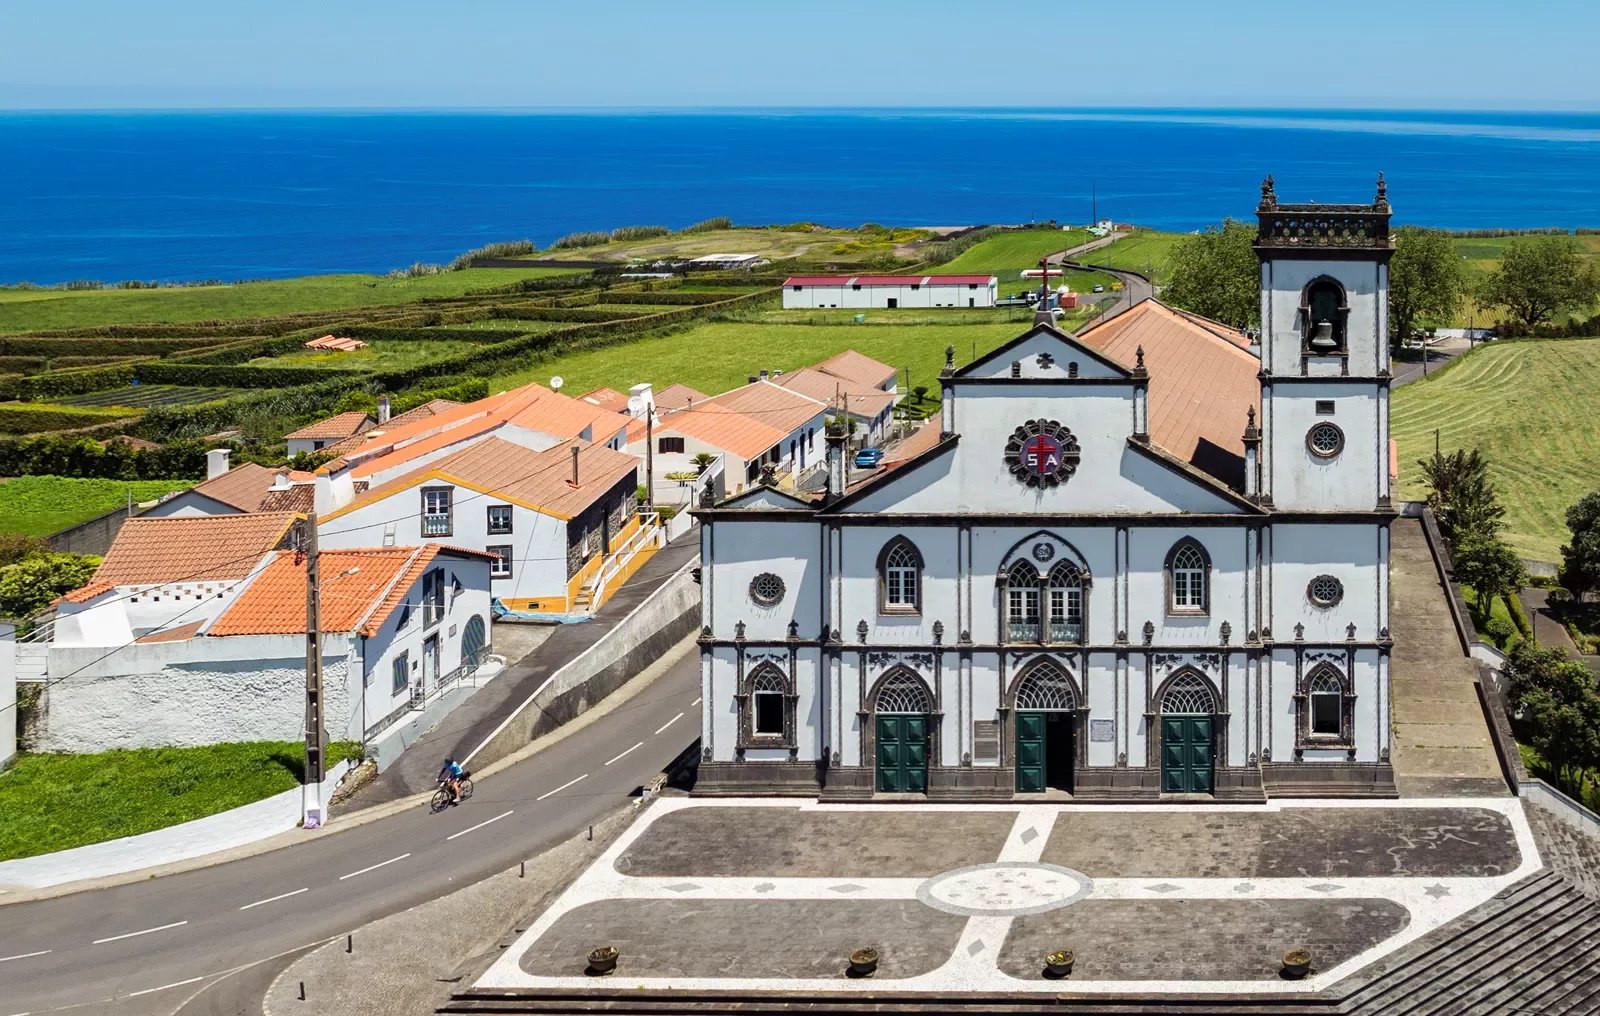 Large church building in the middle of a small town, with an ocean in the background